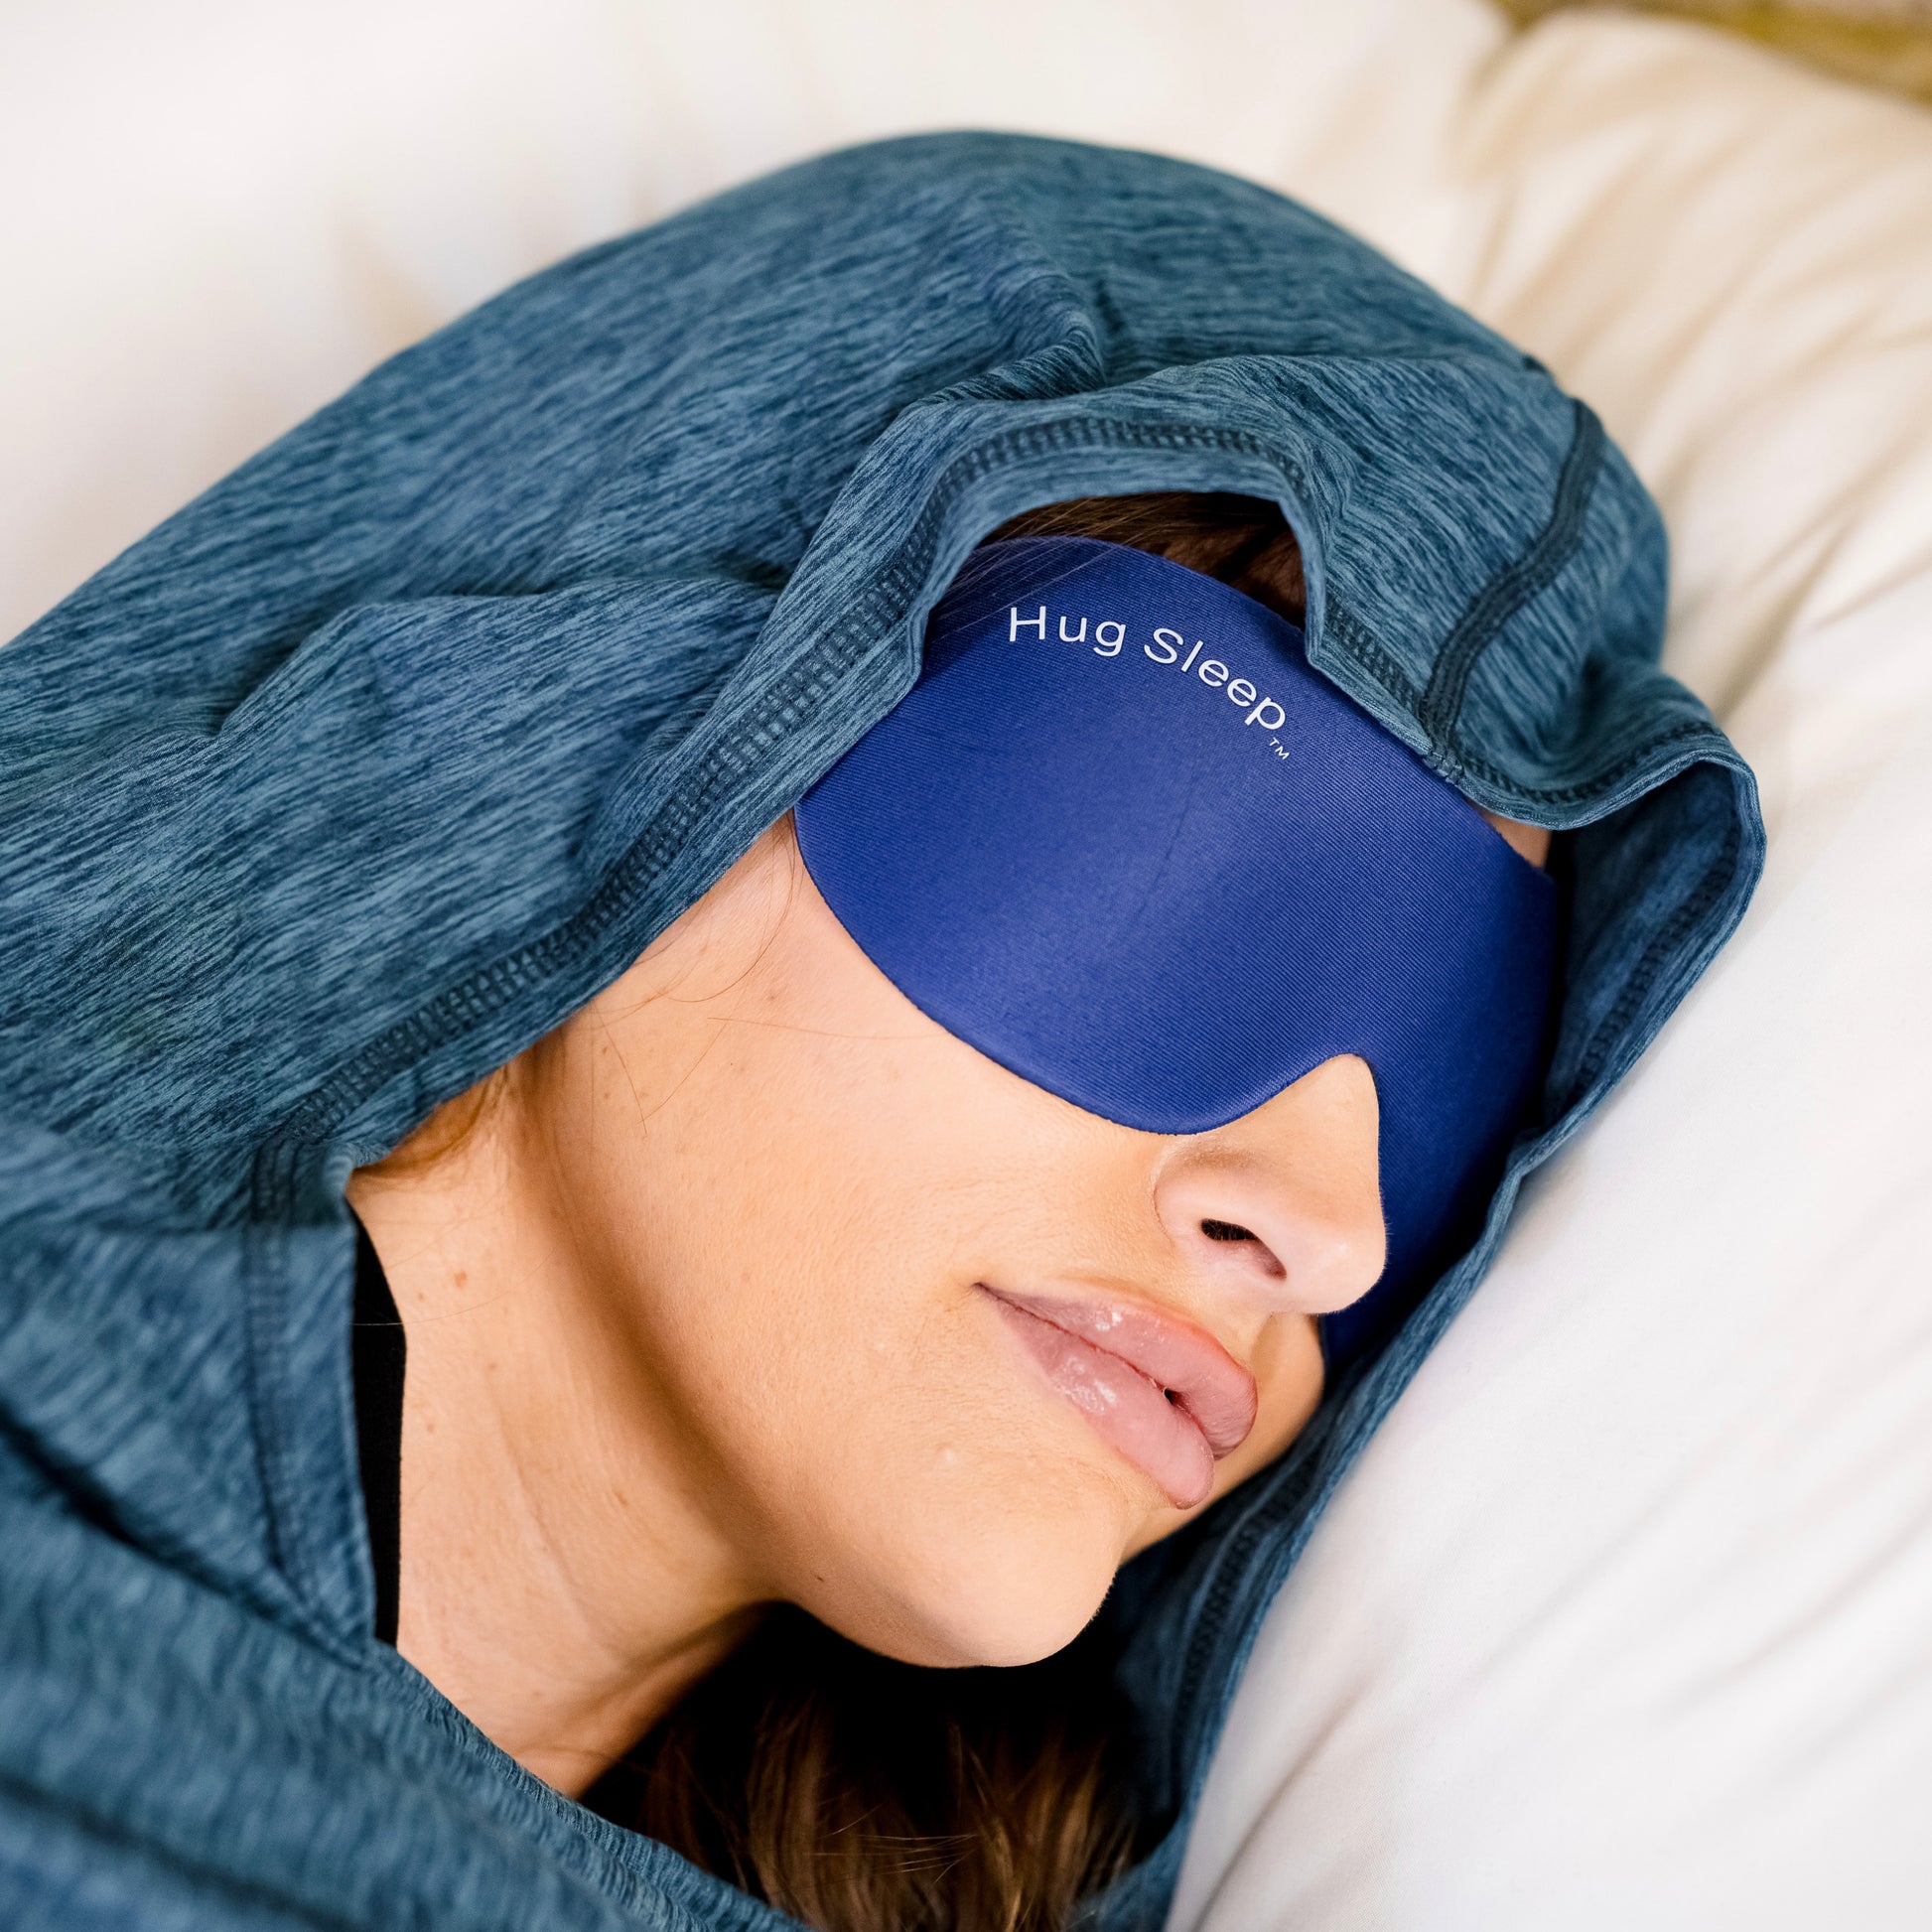 woman laying in bed with hood and sleep mask on